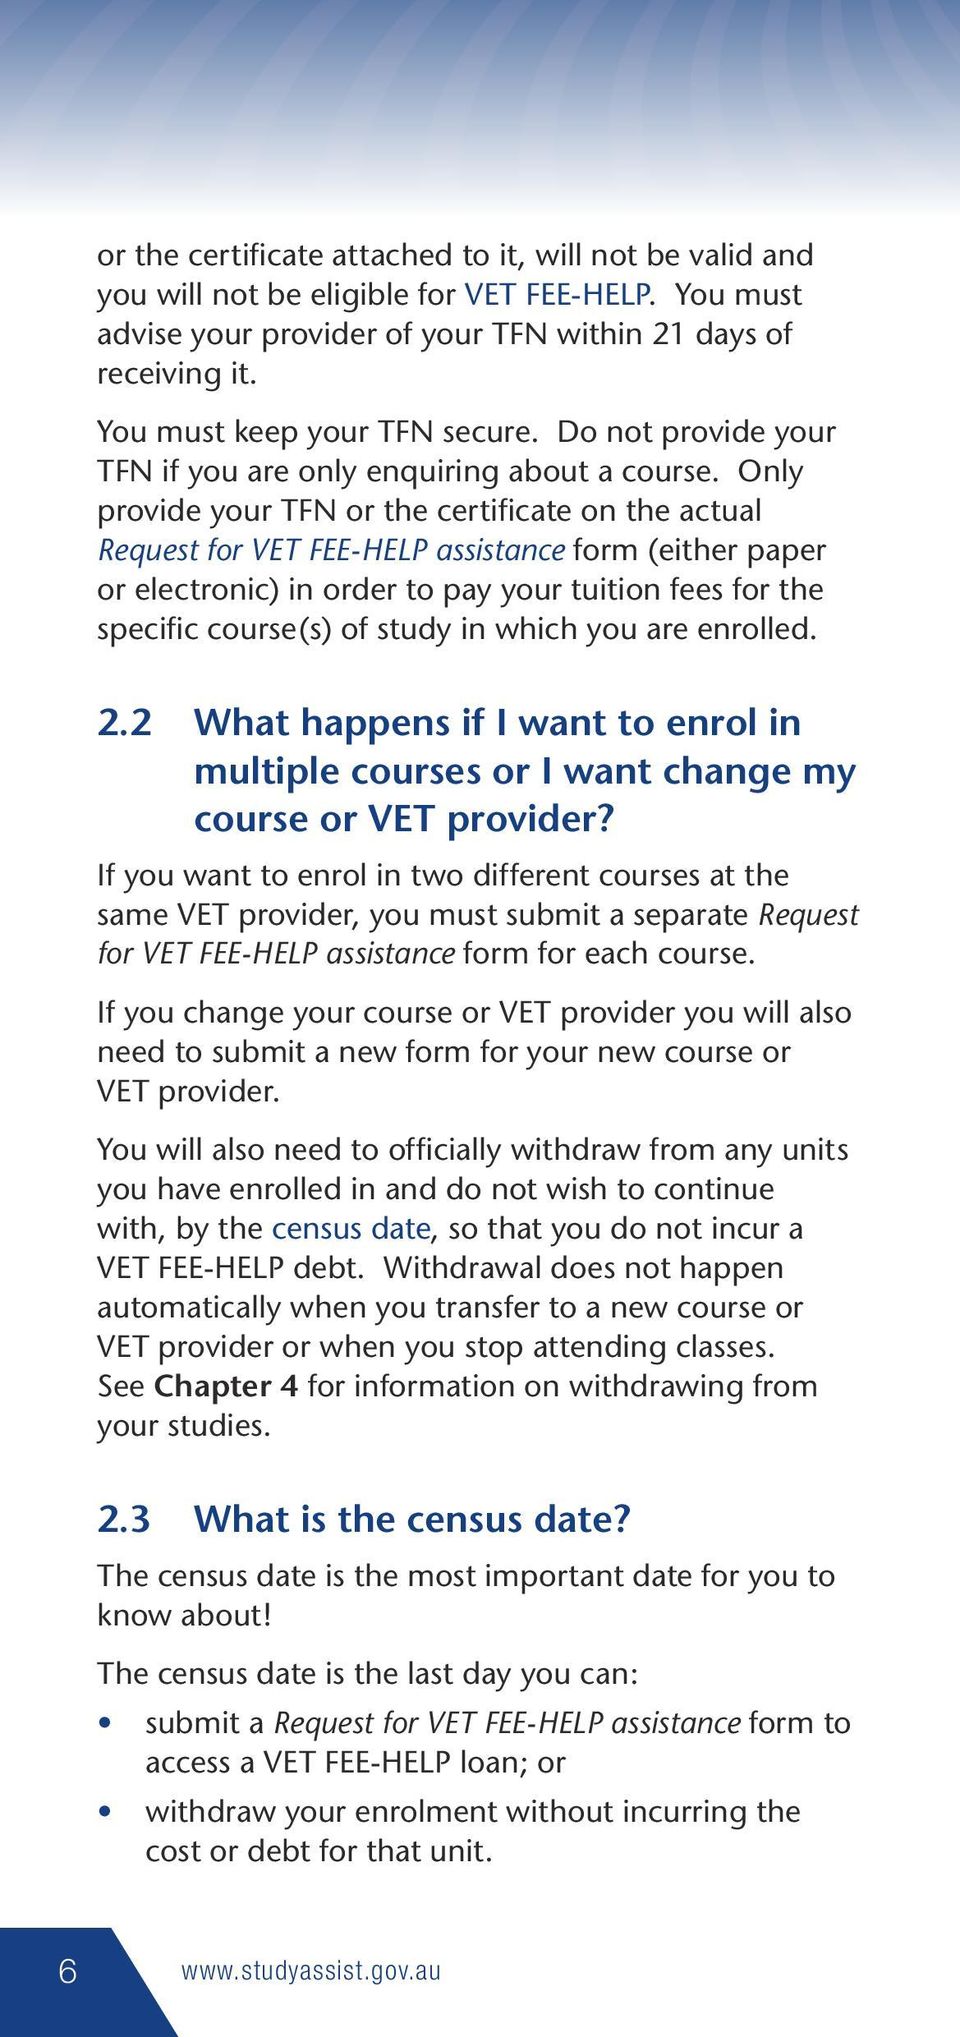 Only provide your TFN or the certificate on the actual Request for VET FEE-HELP assistance form (either paper or electronic) in order to pay your tuition fees for the specific course(s) of study in